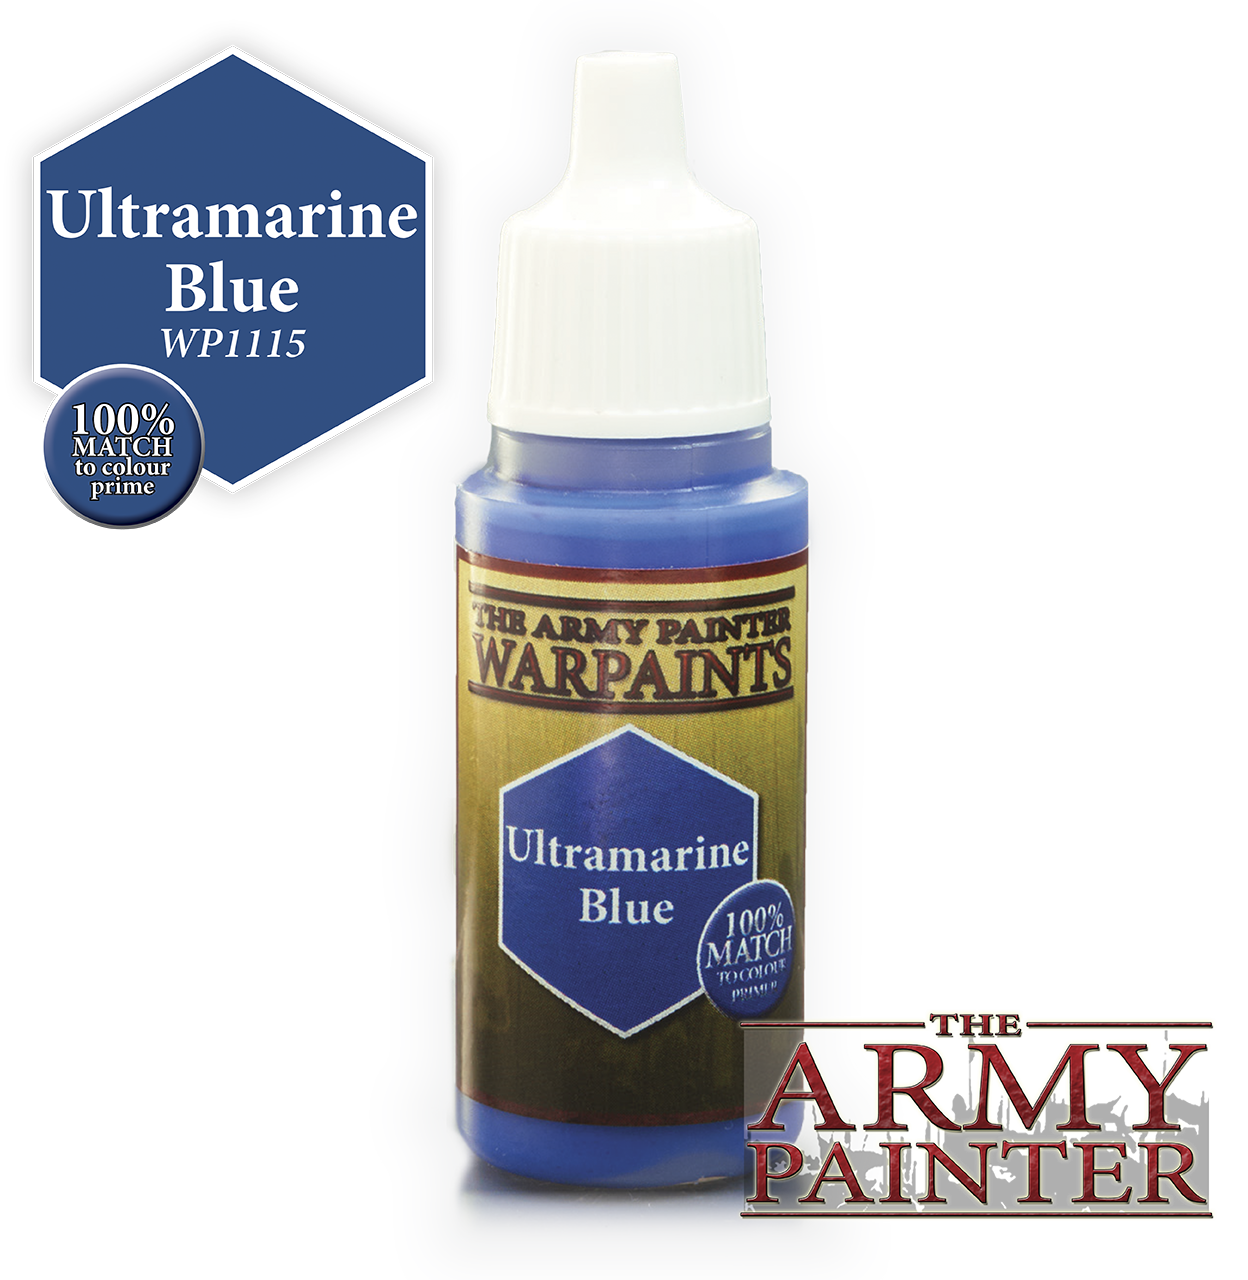 The ARMY PAINTER: Acrylics Warpaint - Ultramarine Blue | Tacoma Games